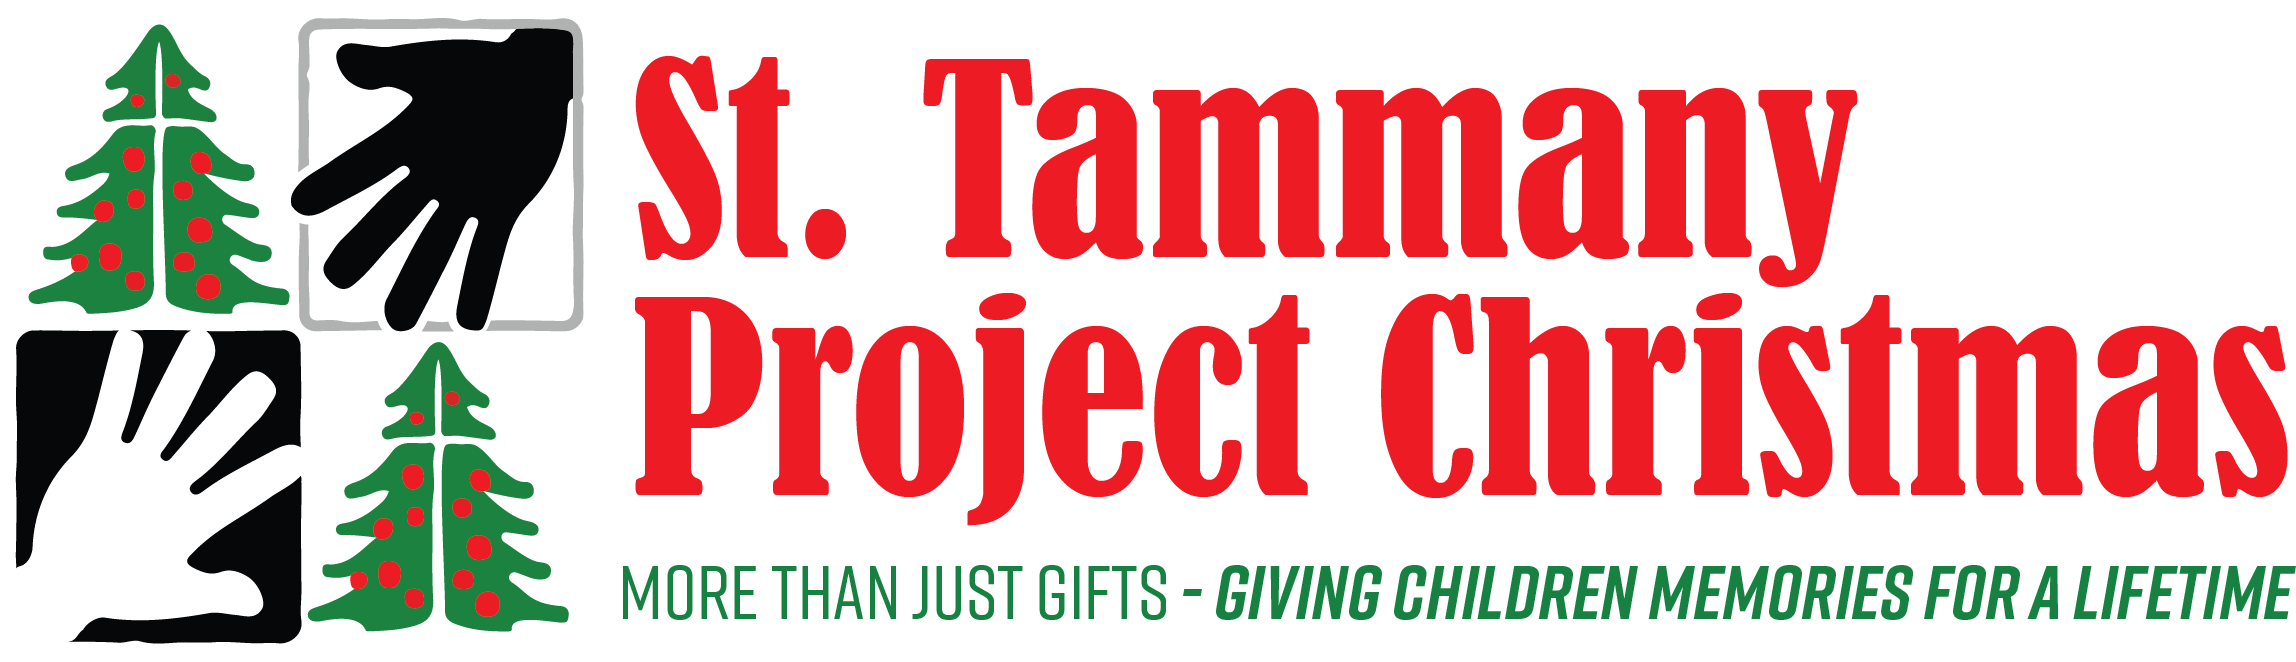 St. Tammany Project Christmas